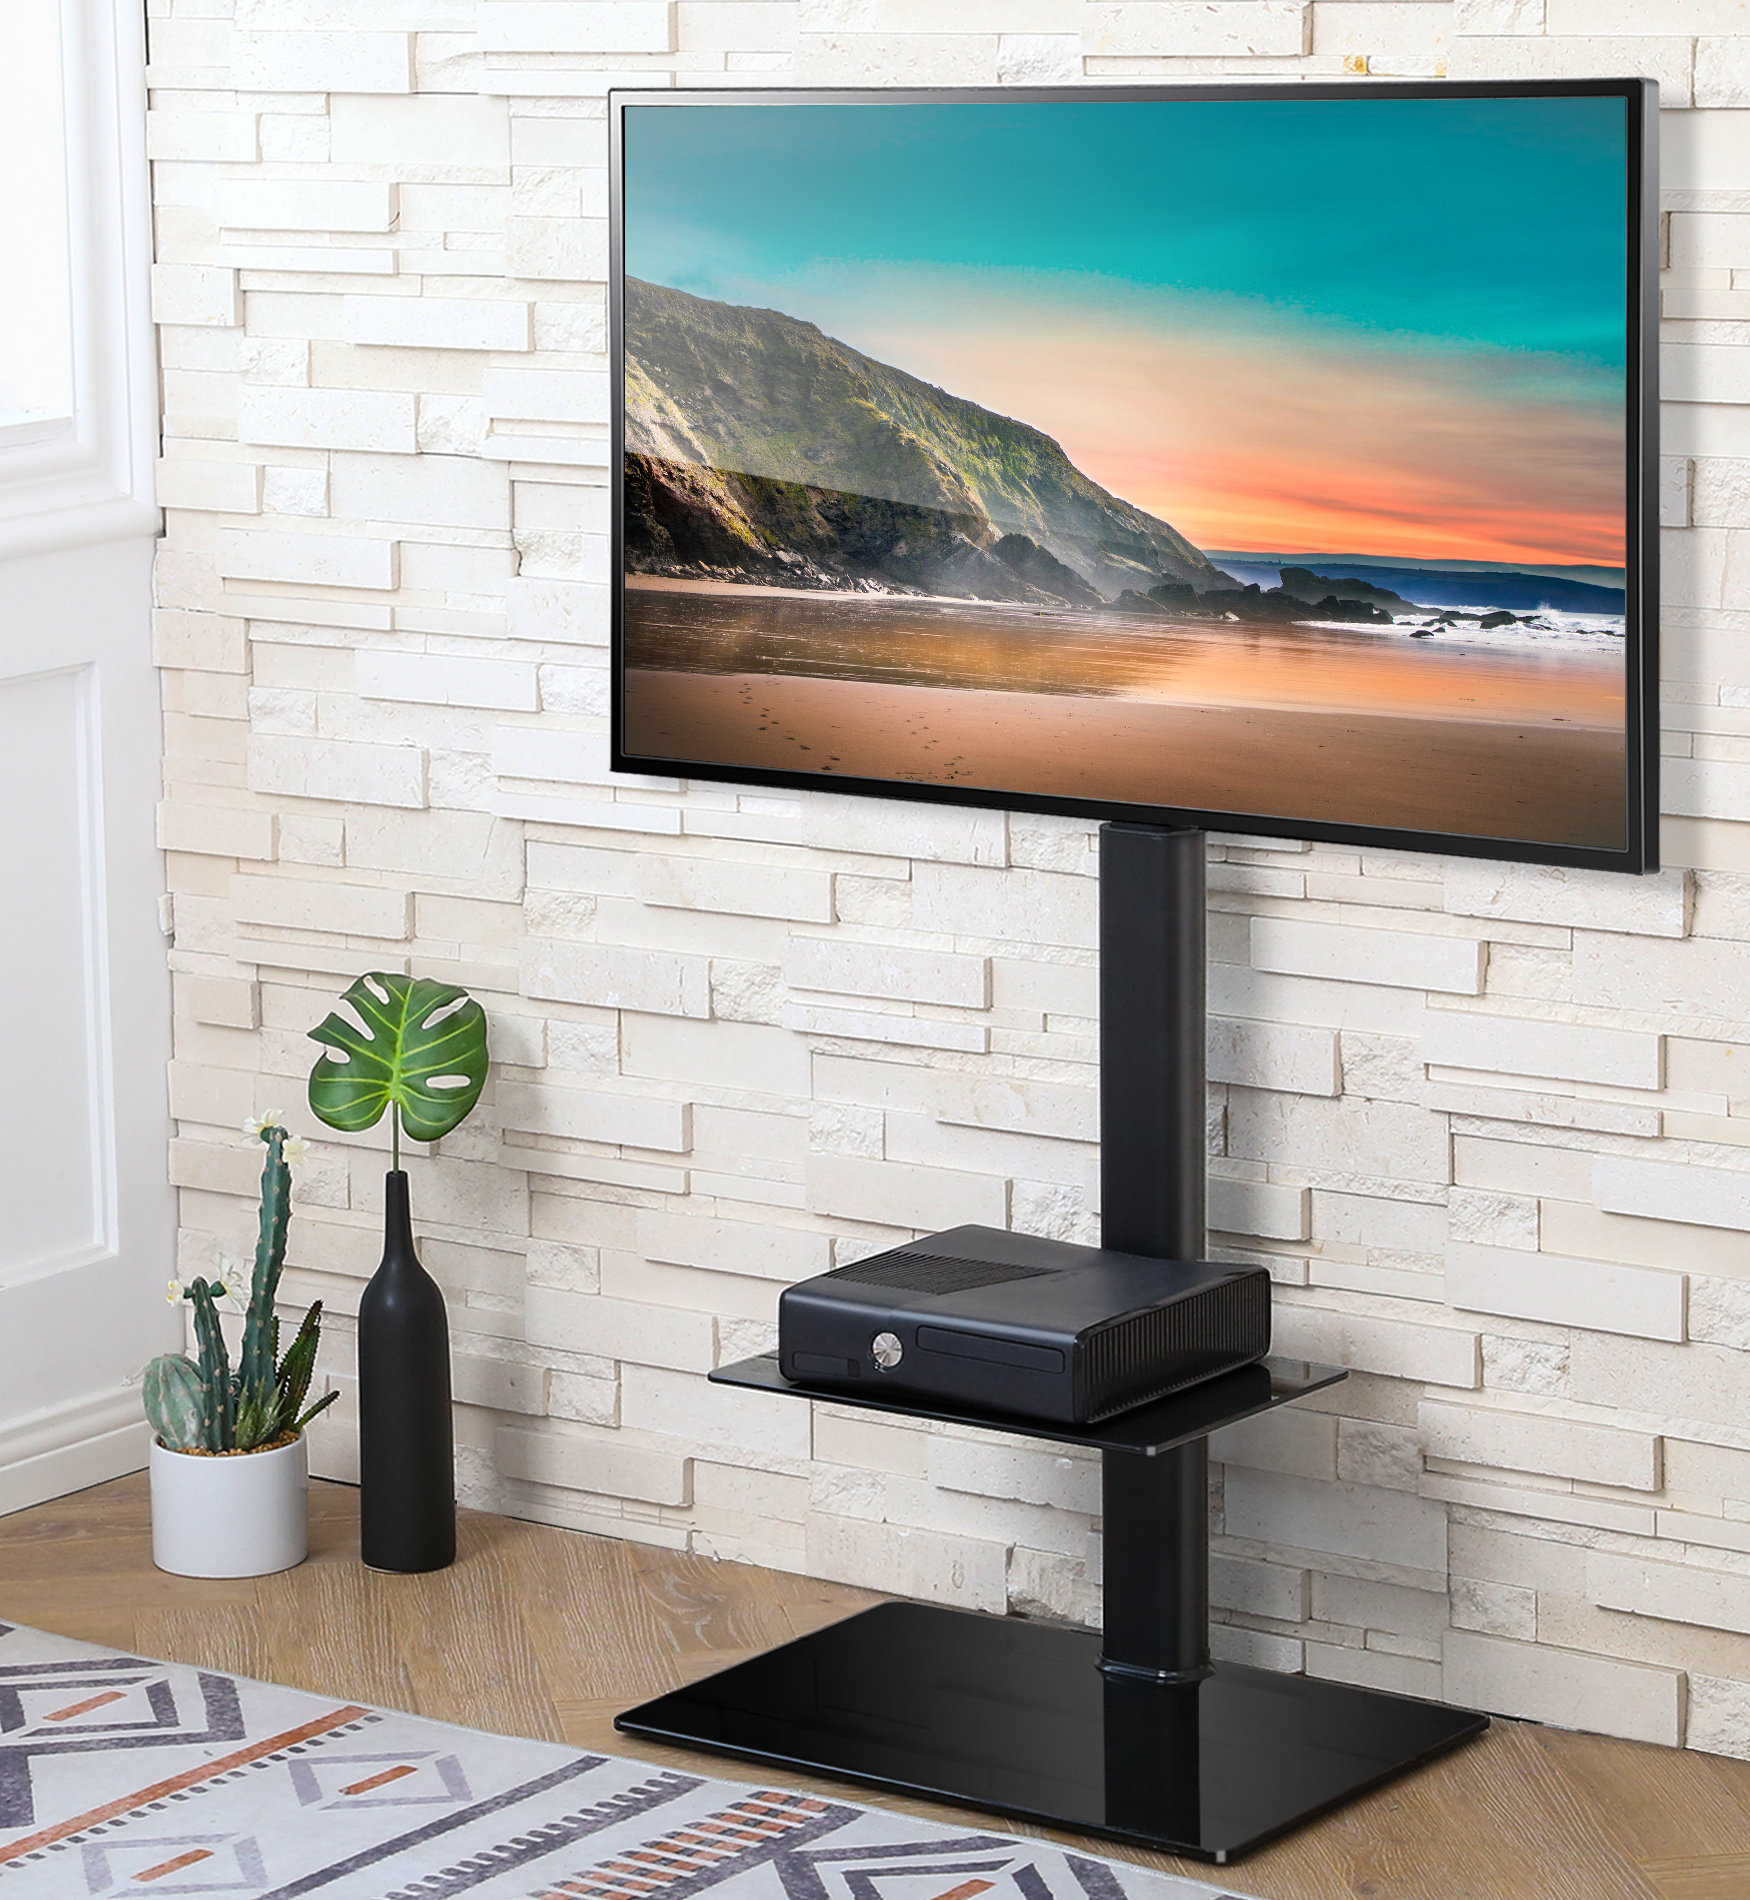 RFIVER Universal TV Entertainment Center,Media Towers TV Furniture Floor Corner 3-in-1 TV Stands with Swivel Height Adjustable TV Mount Bracket for 32 to 65 inch Black 